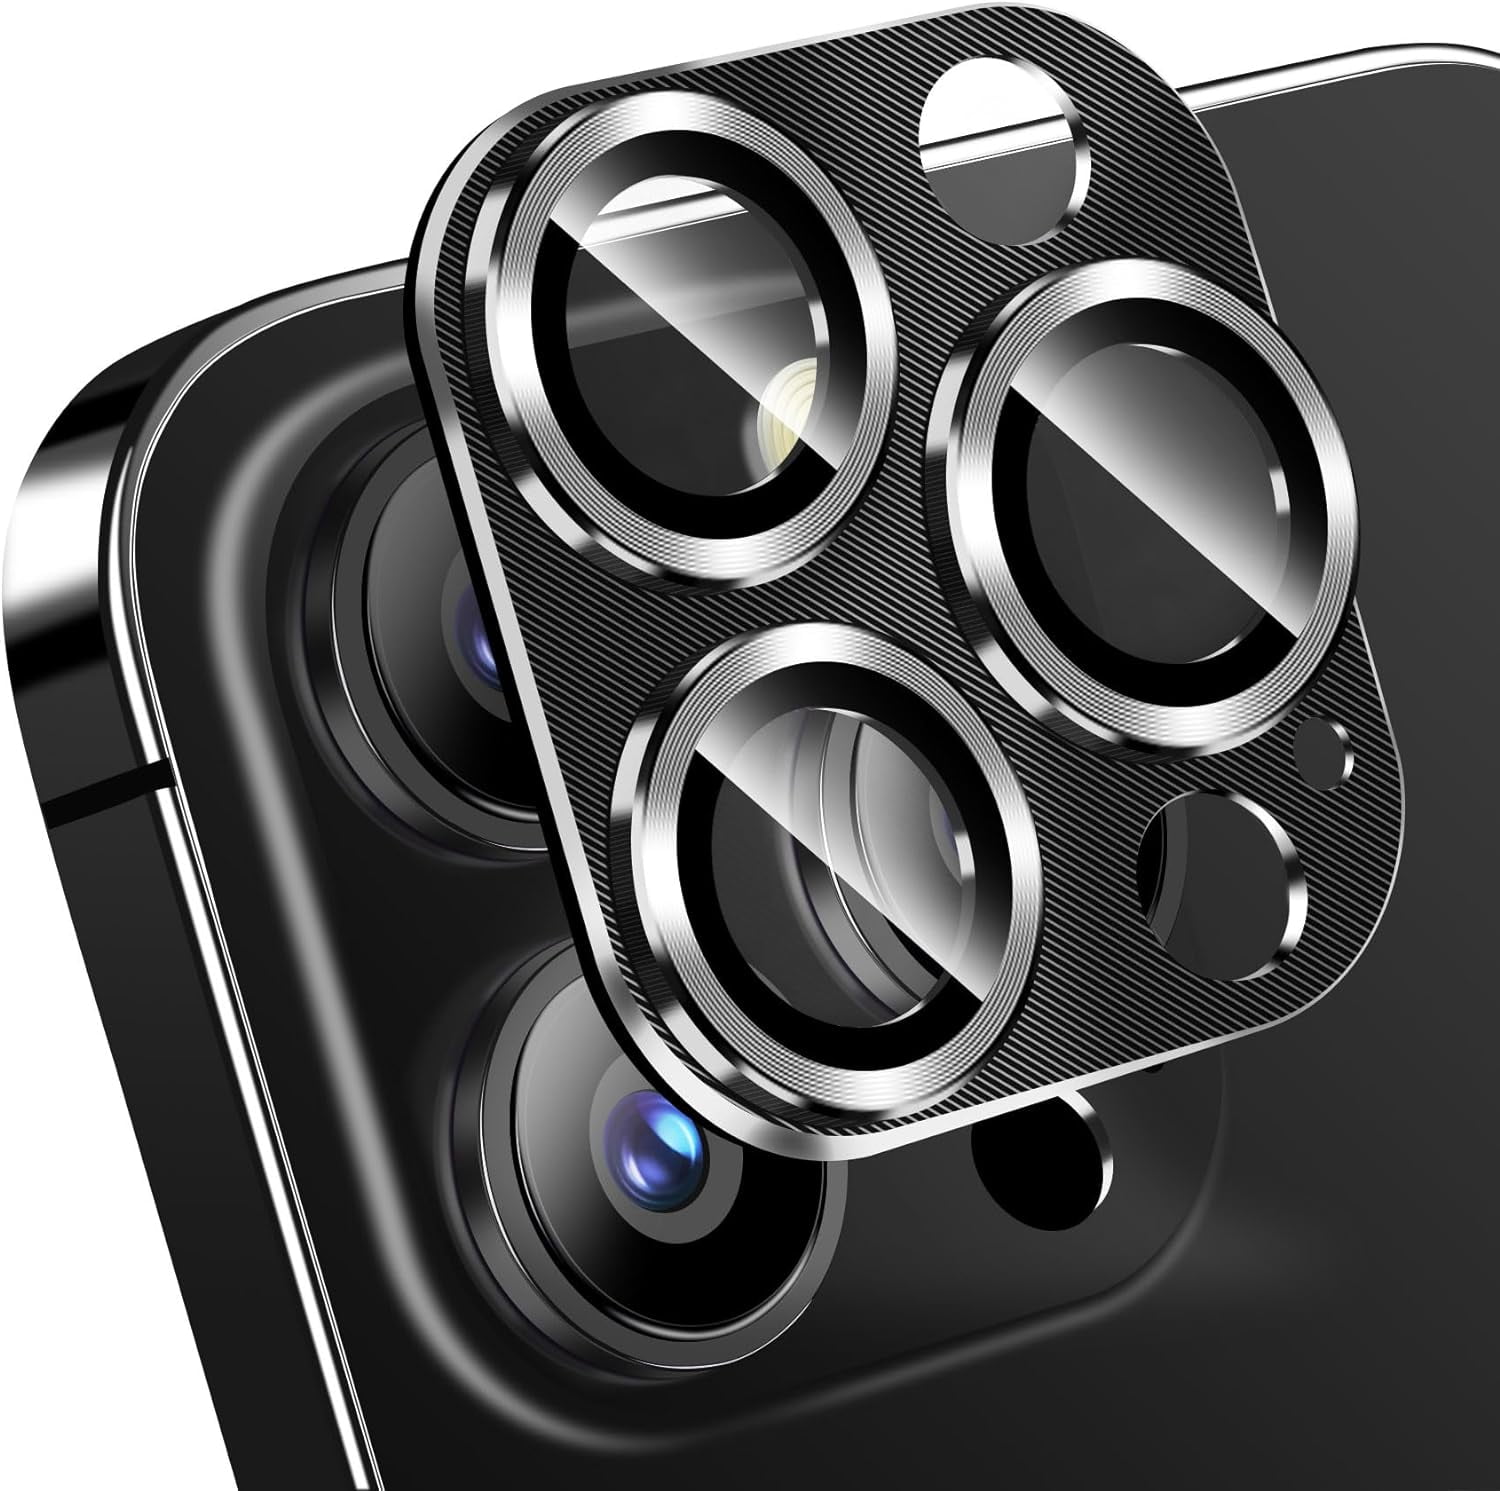 All in one aluminum glass camera lens protector for iphone 15 Pro and 15 Pro  Max - Ruzen